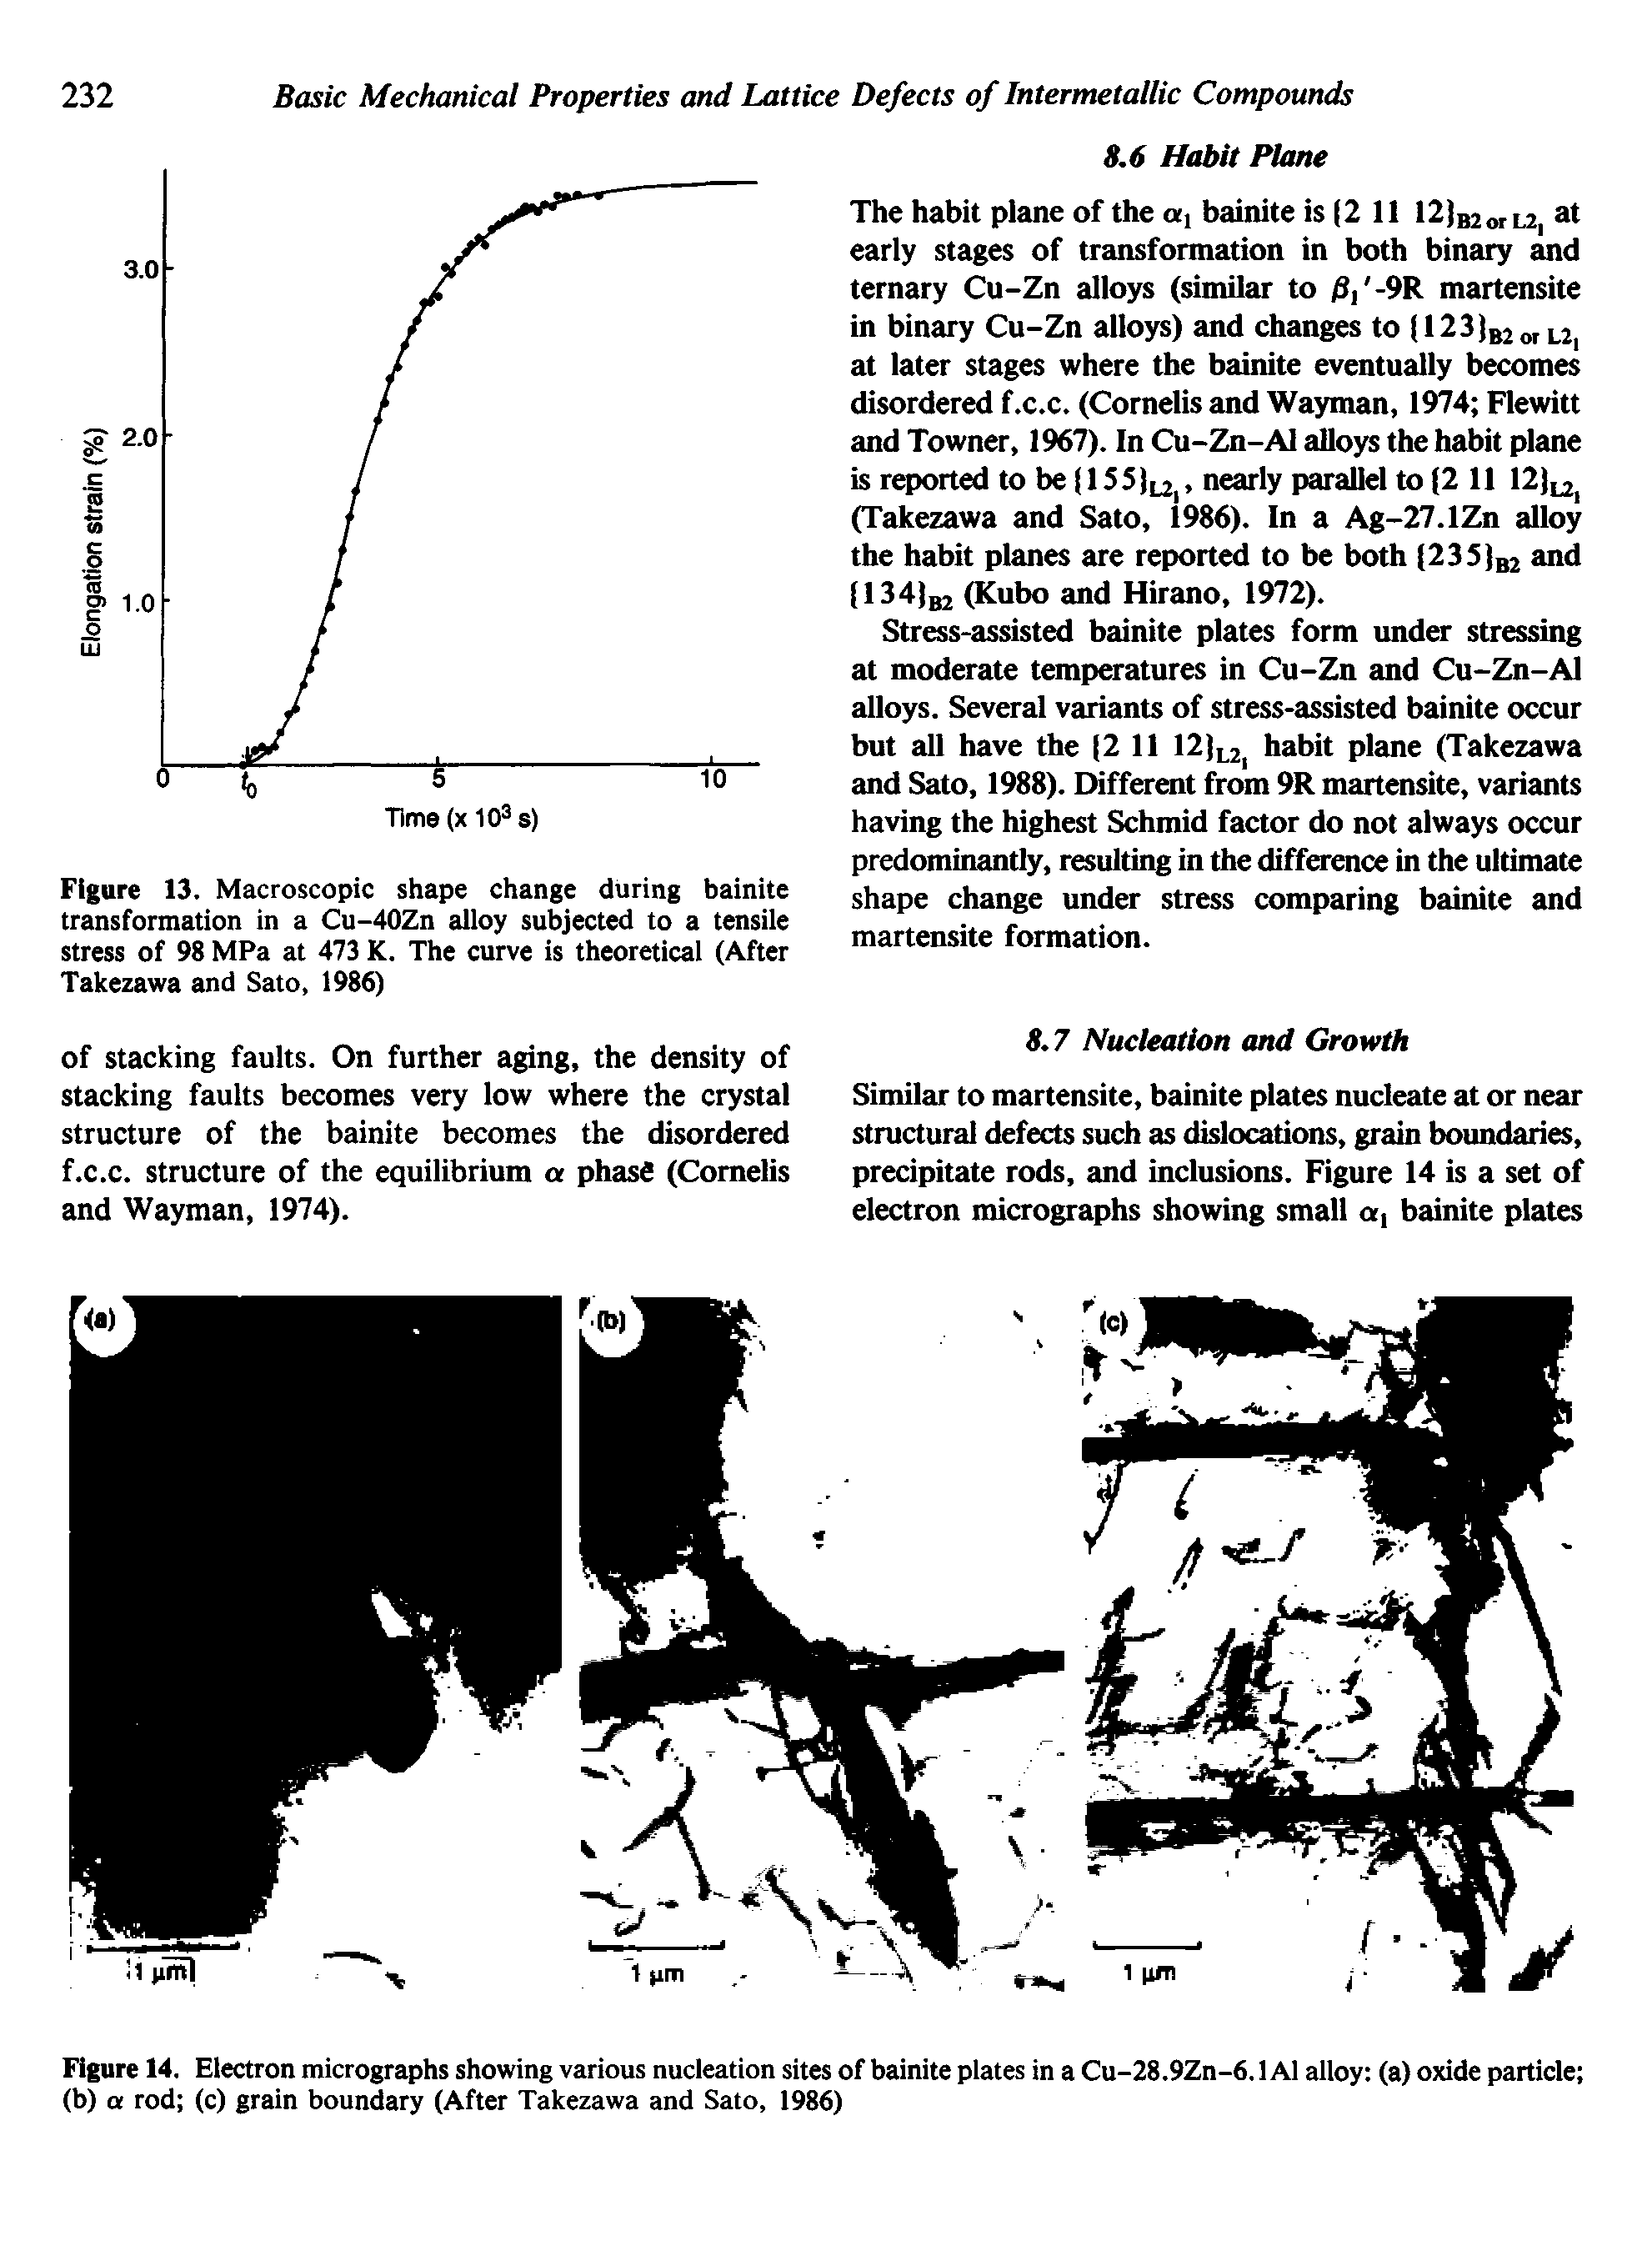 Figure 13. Macroscopic shape change during bainite transformation in a Cu-40Zn alloy subjected to a tensile stress of 98 MPa at 473 K. The curve is theoretical (After Takezawa and Sato, 1986)...